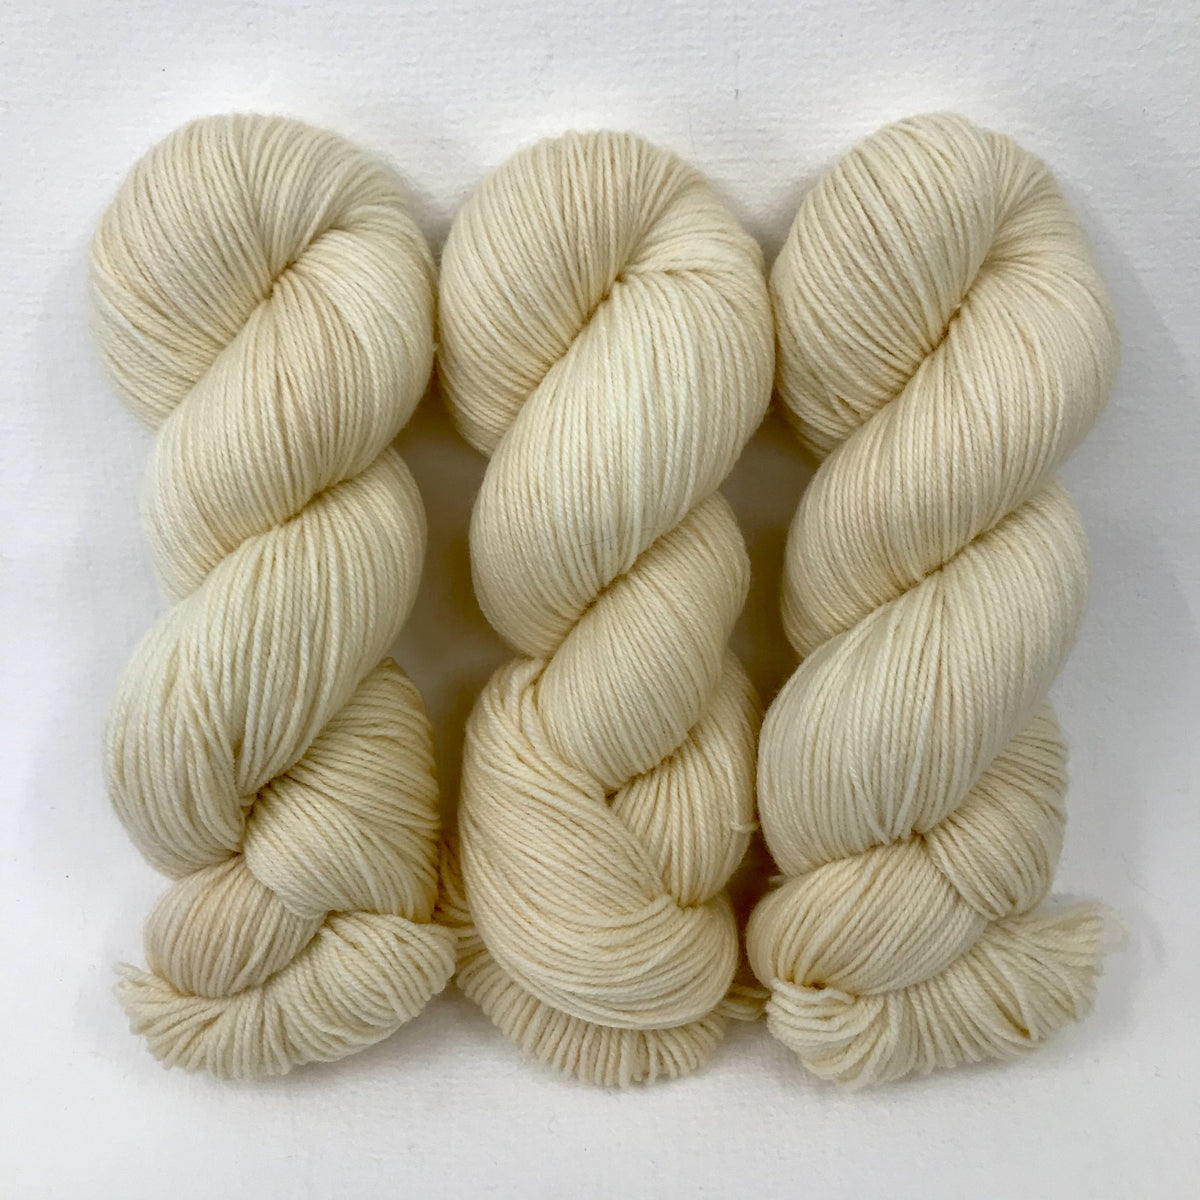 Creme de la Creme - Revival Worsted - Dyed Stock